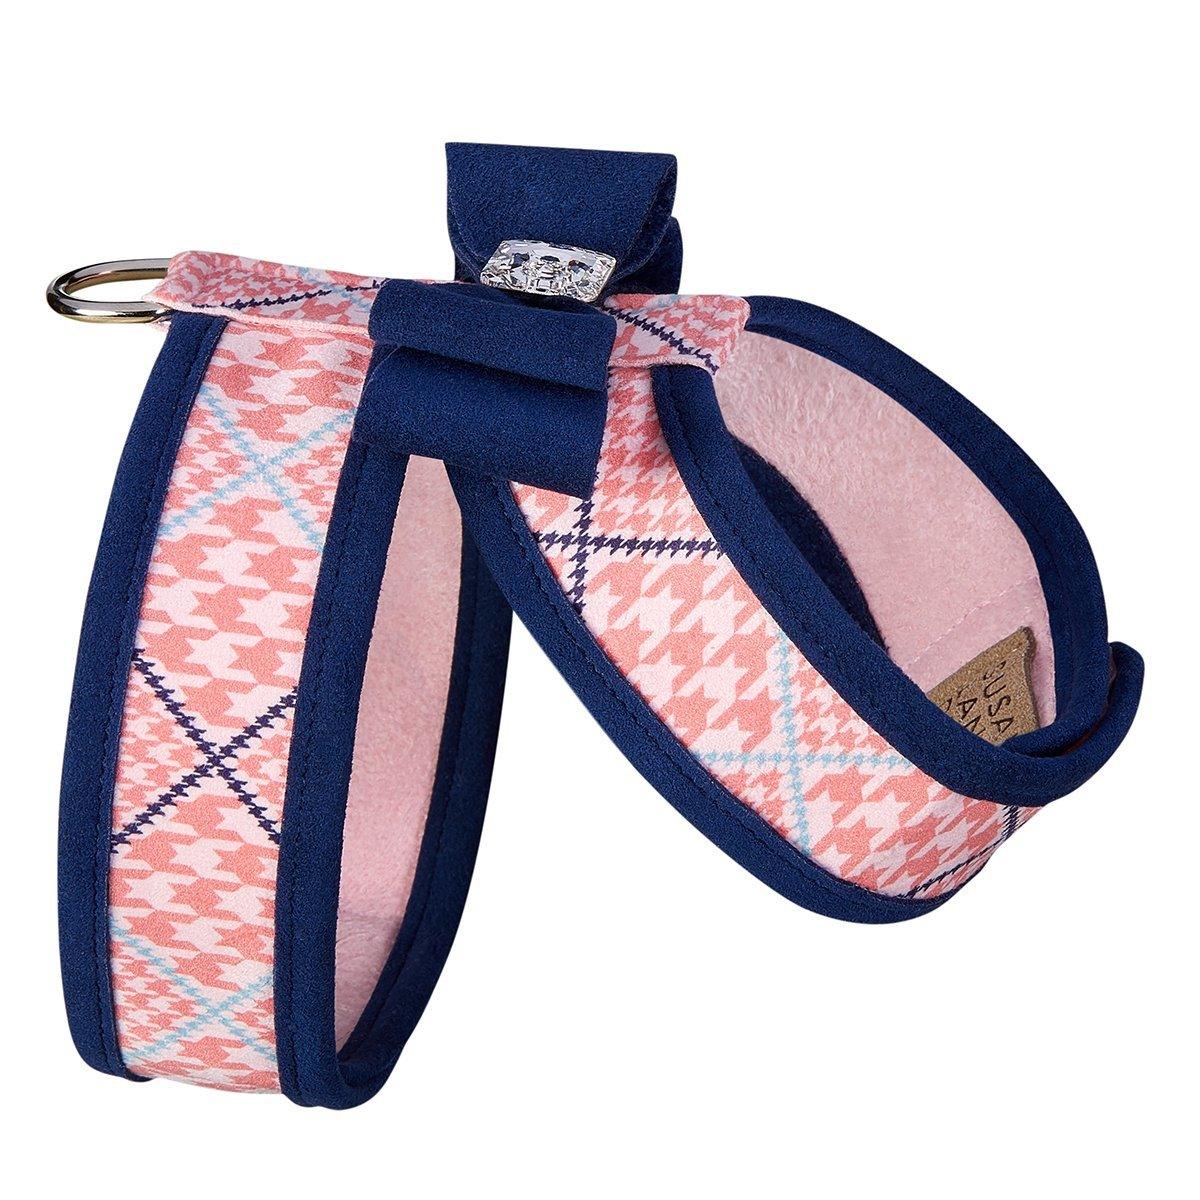 Glen Houndstooth Tinkie Harness with Big Bow and Trim - Rocky & Maggie's Pet Boutique and Salon